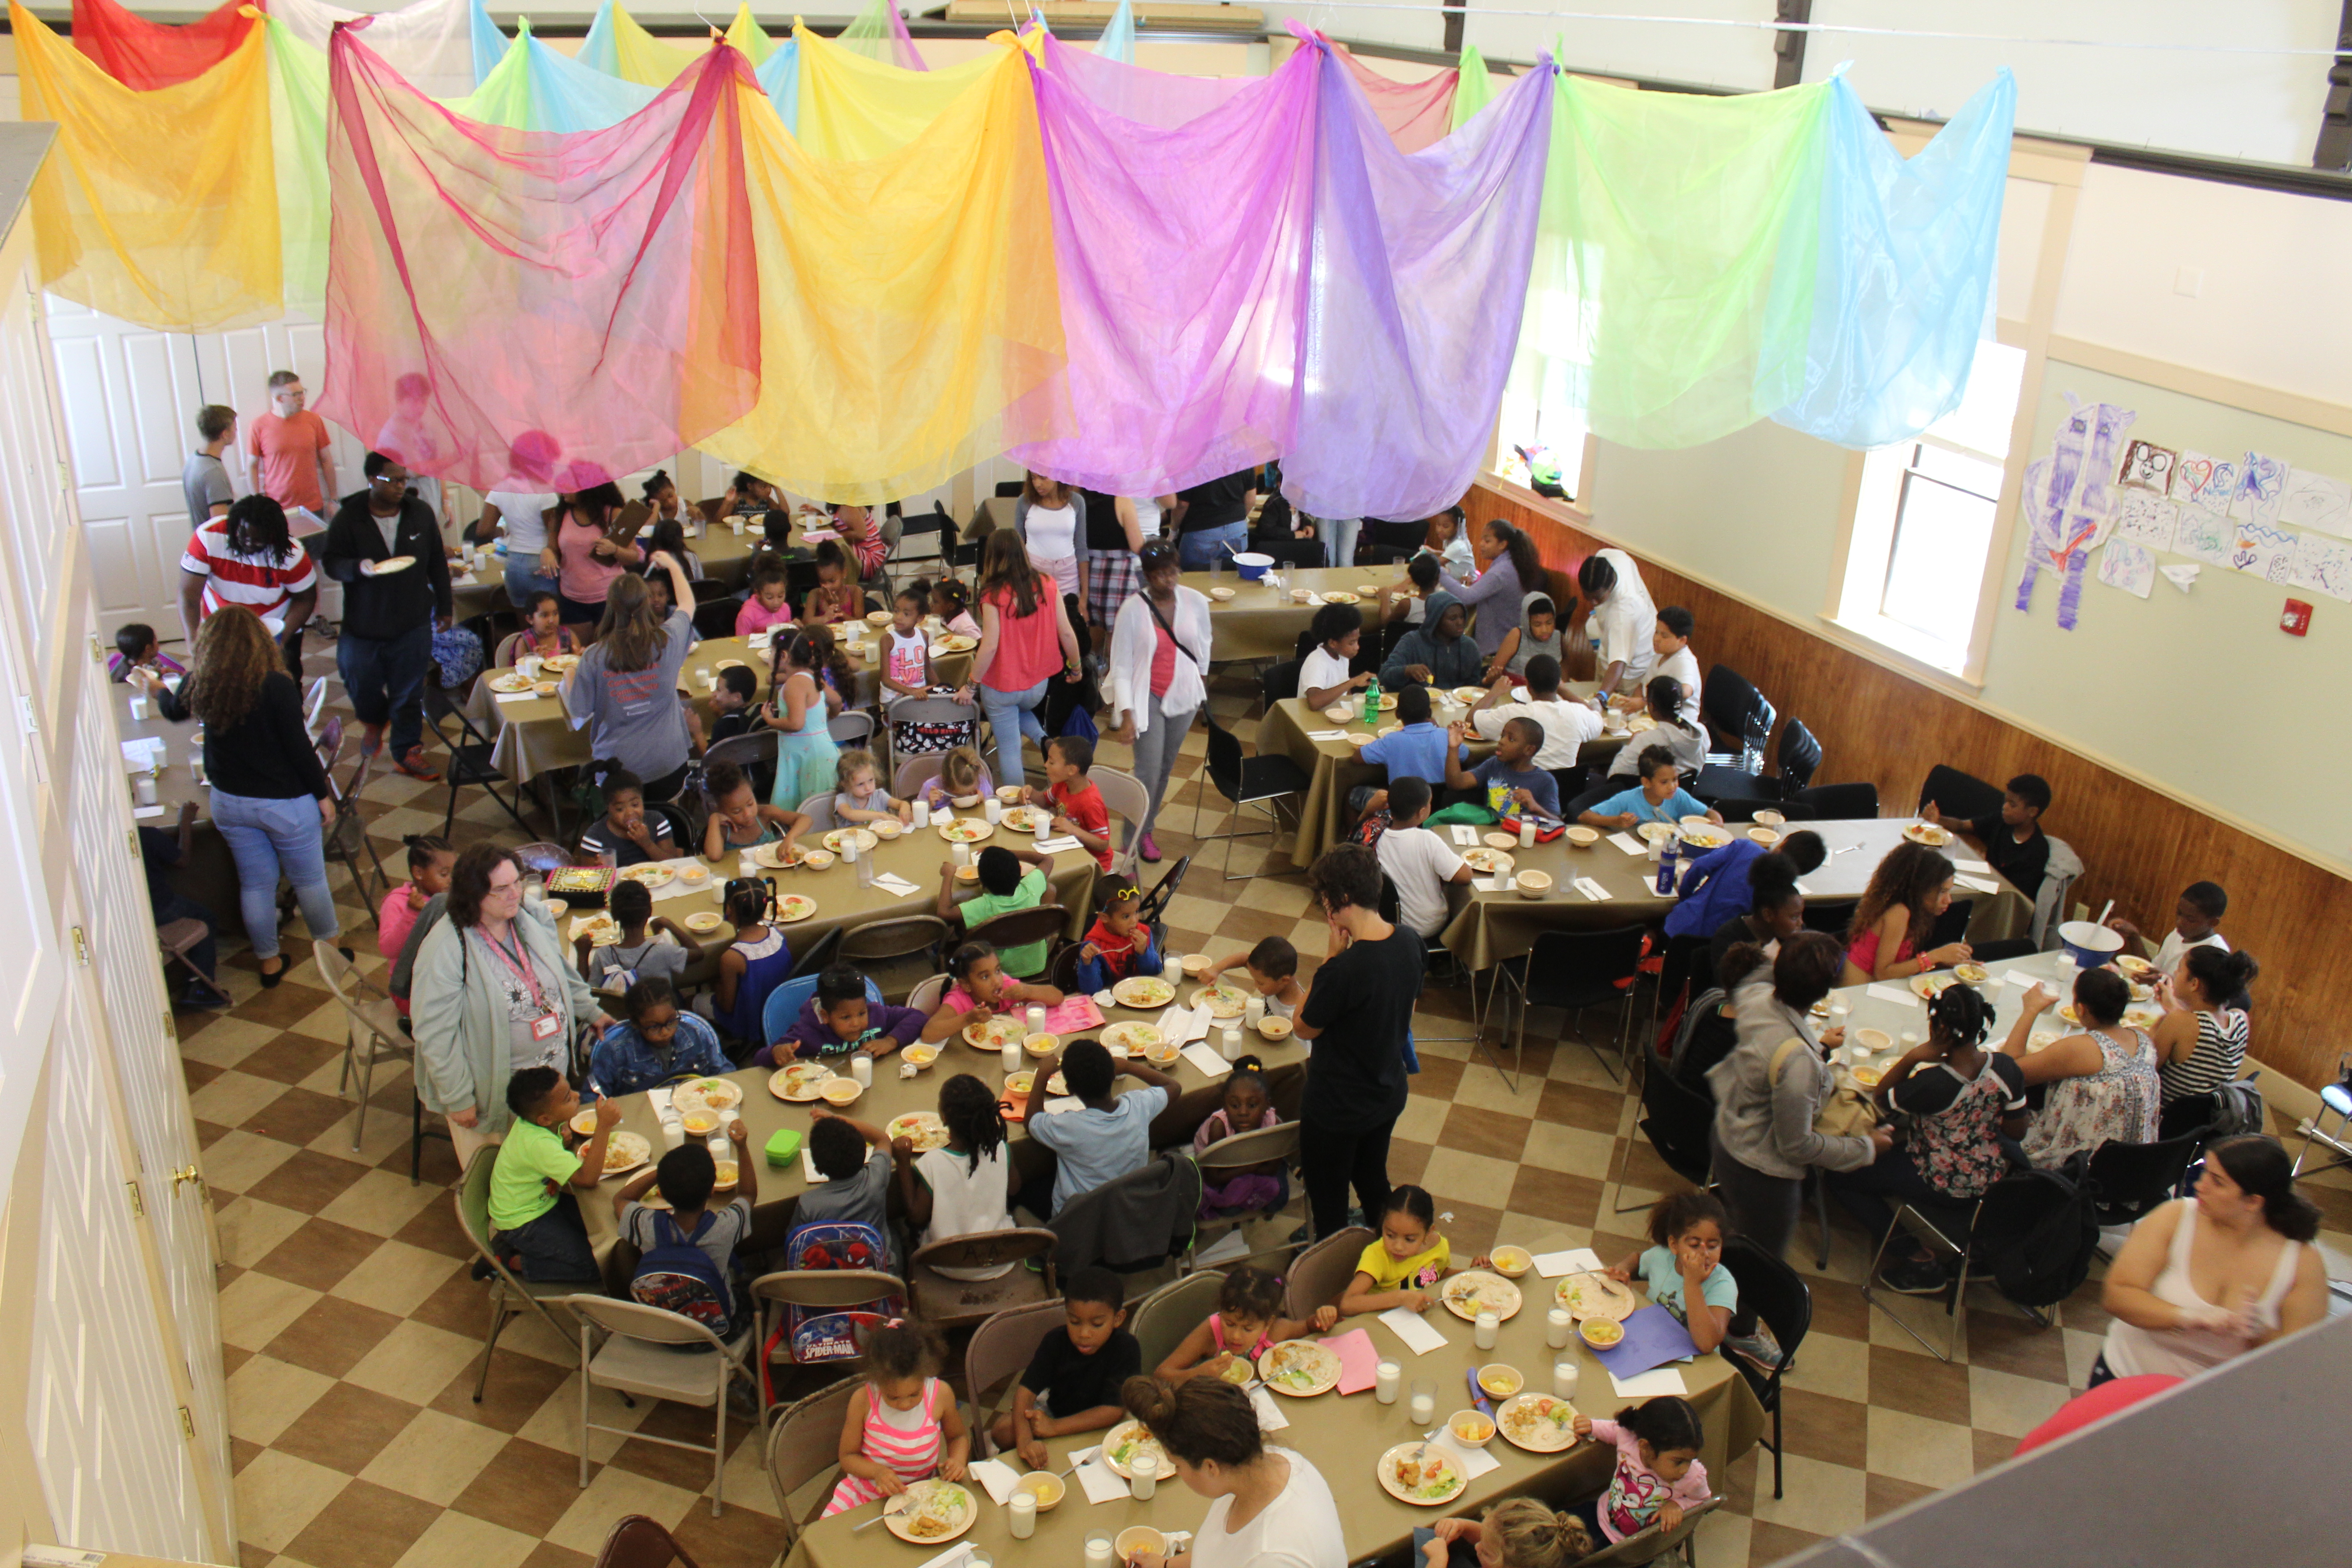 About one hundred kids sit at tables eating together, underneath beautiful rainbow fabric that hands from the ceiling above them.